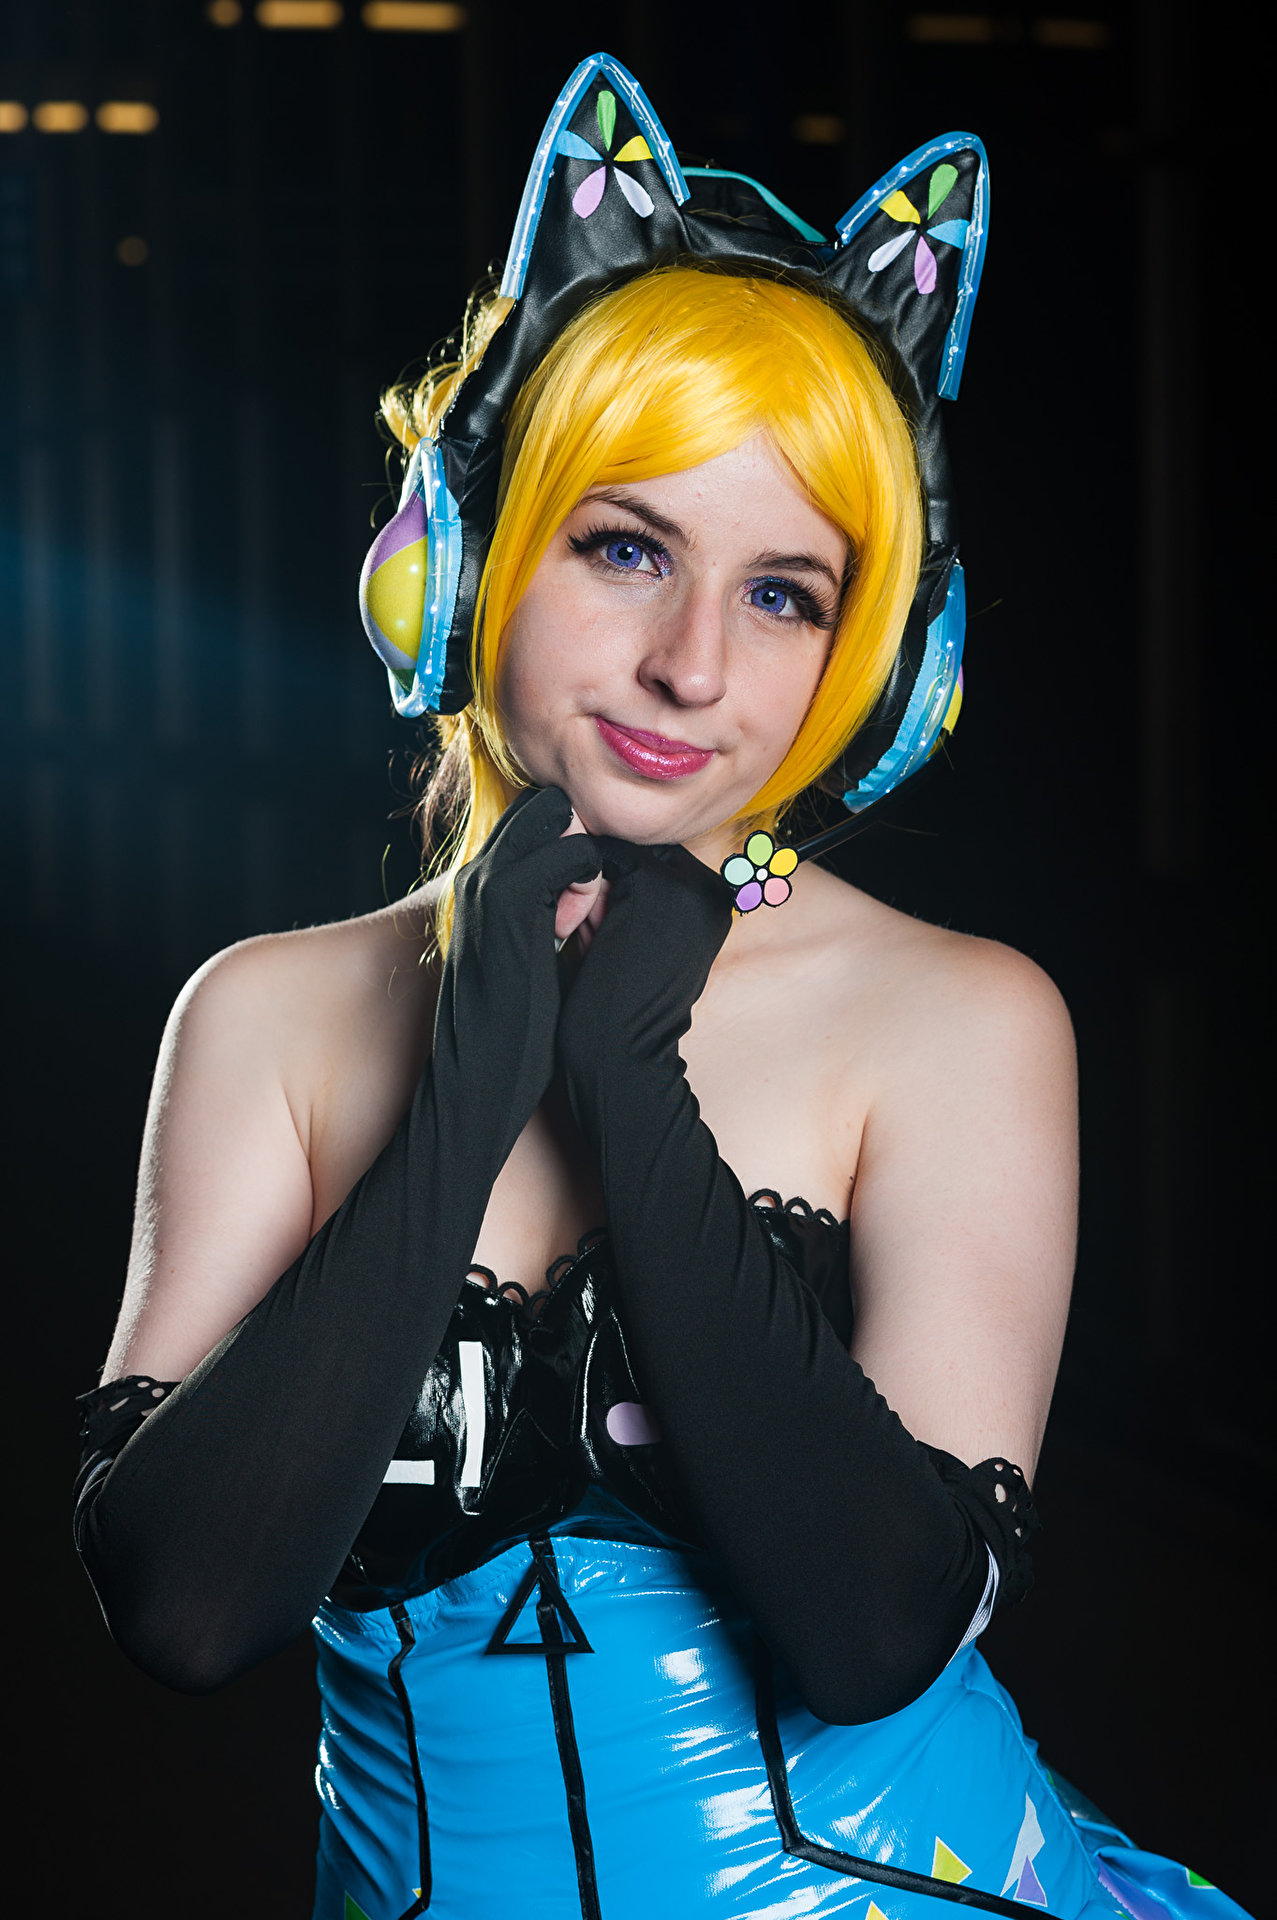 Cospix.net photo featuring Charberry Cosplay